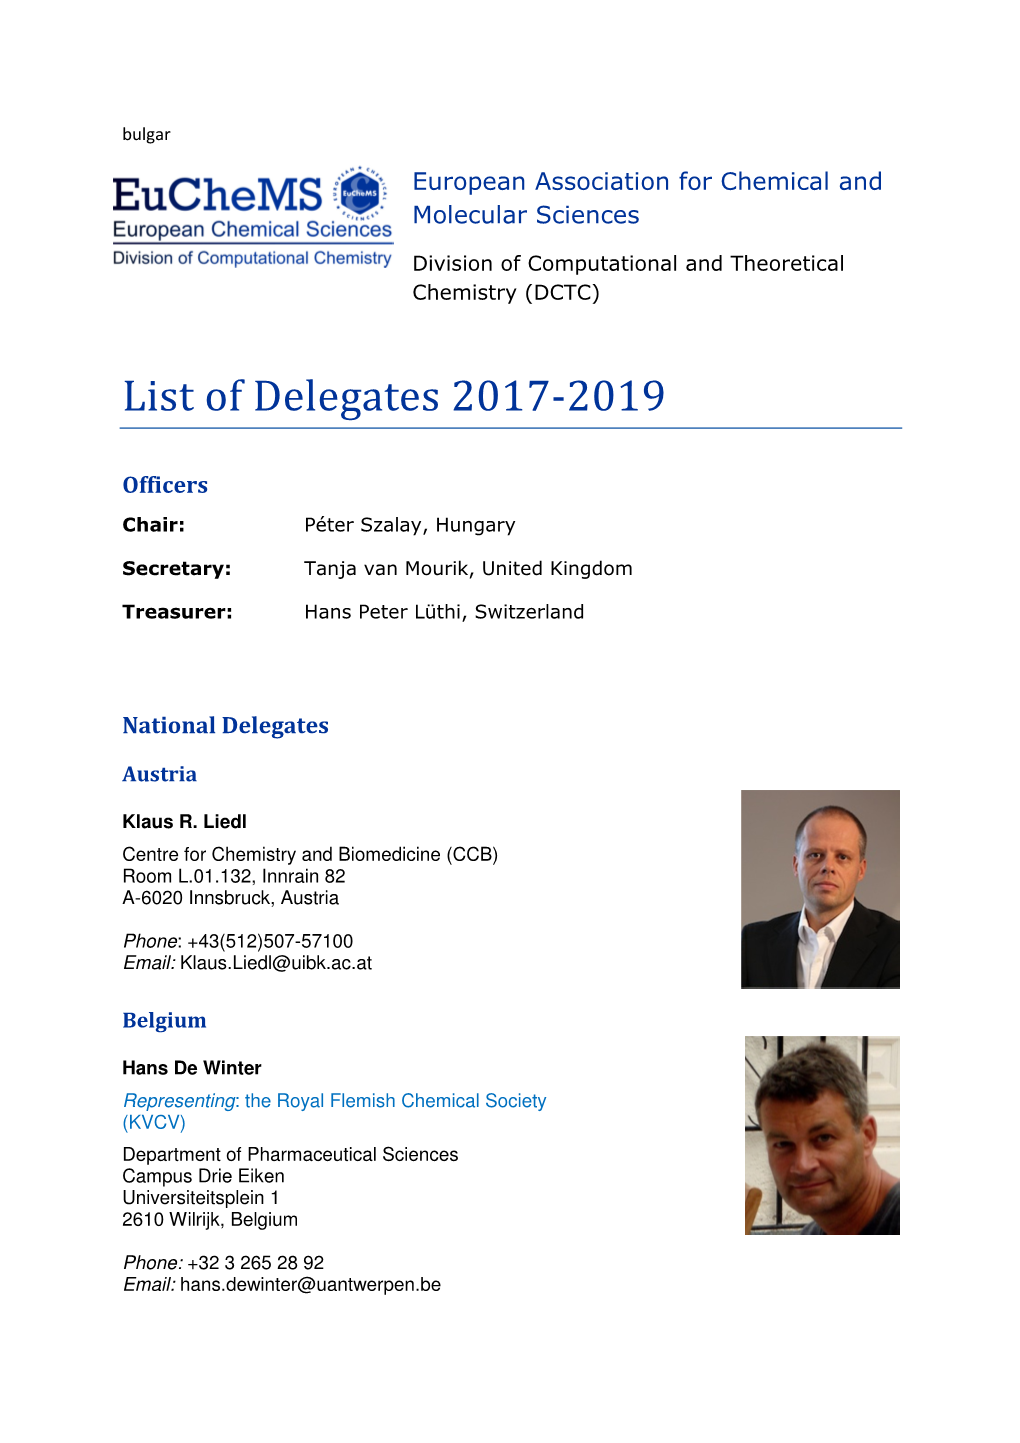 List of Delegates 2017-2019 Page 2 of 9